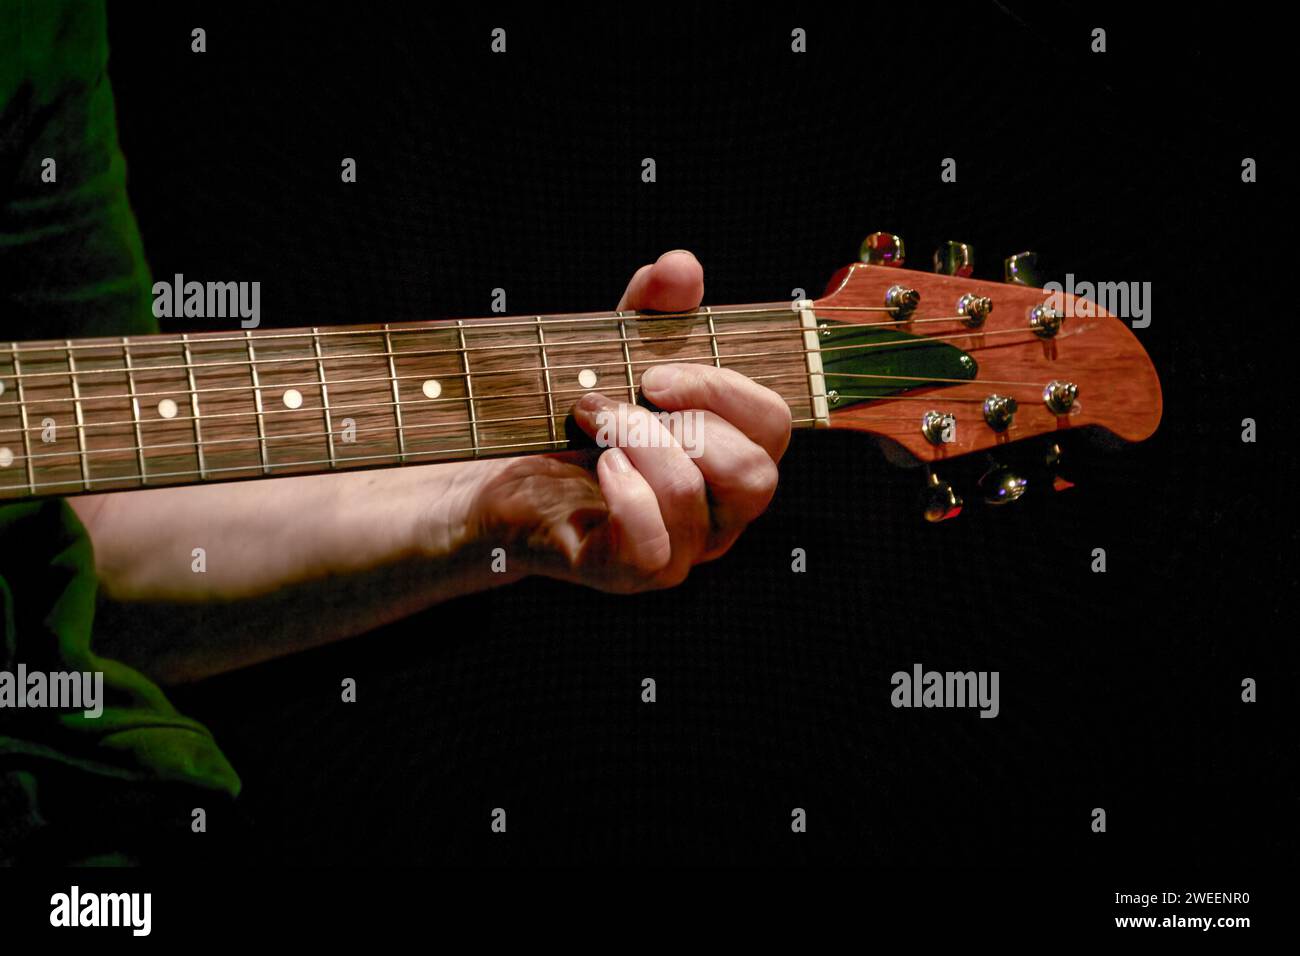 Image of a musician's fingers playing a chord on a guitar neck Stock Photo